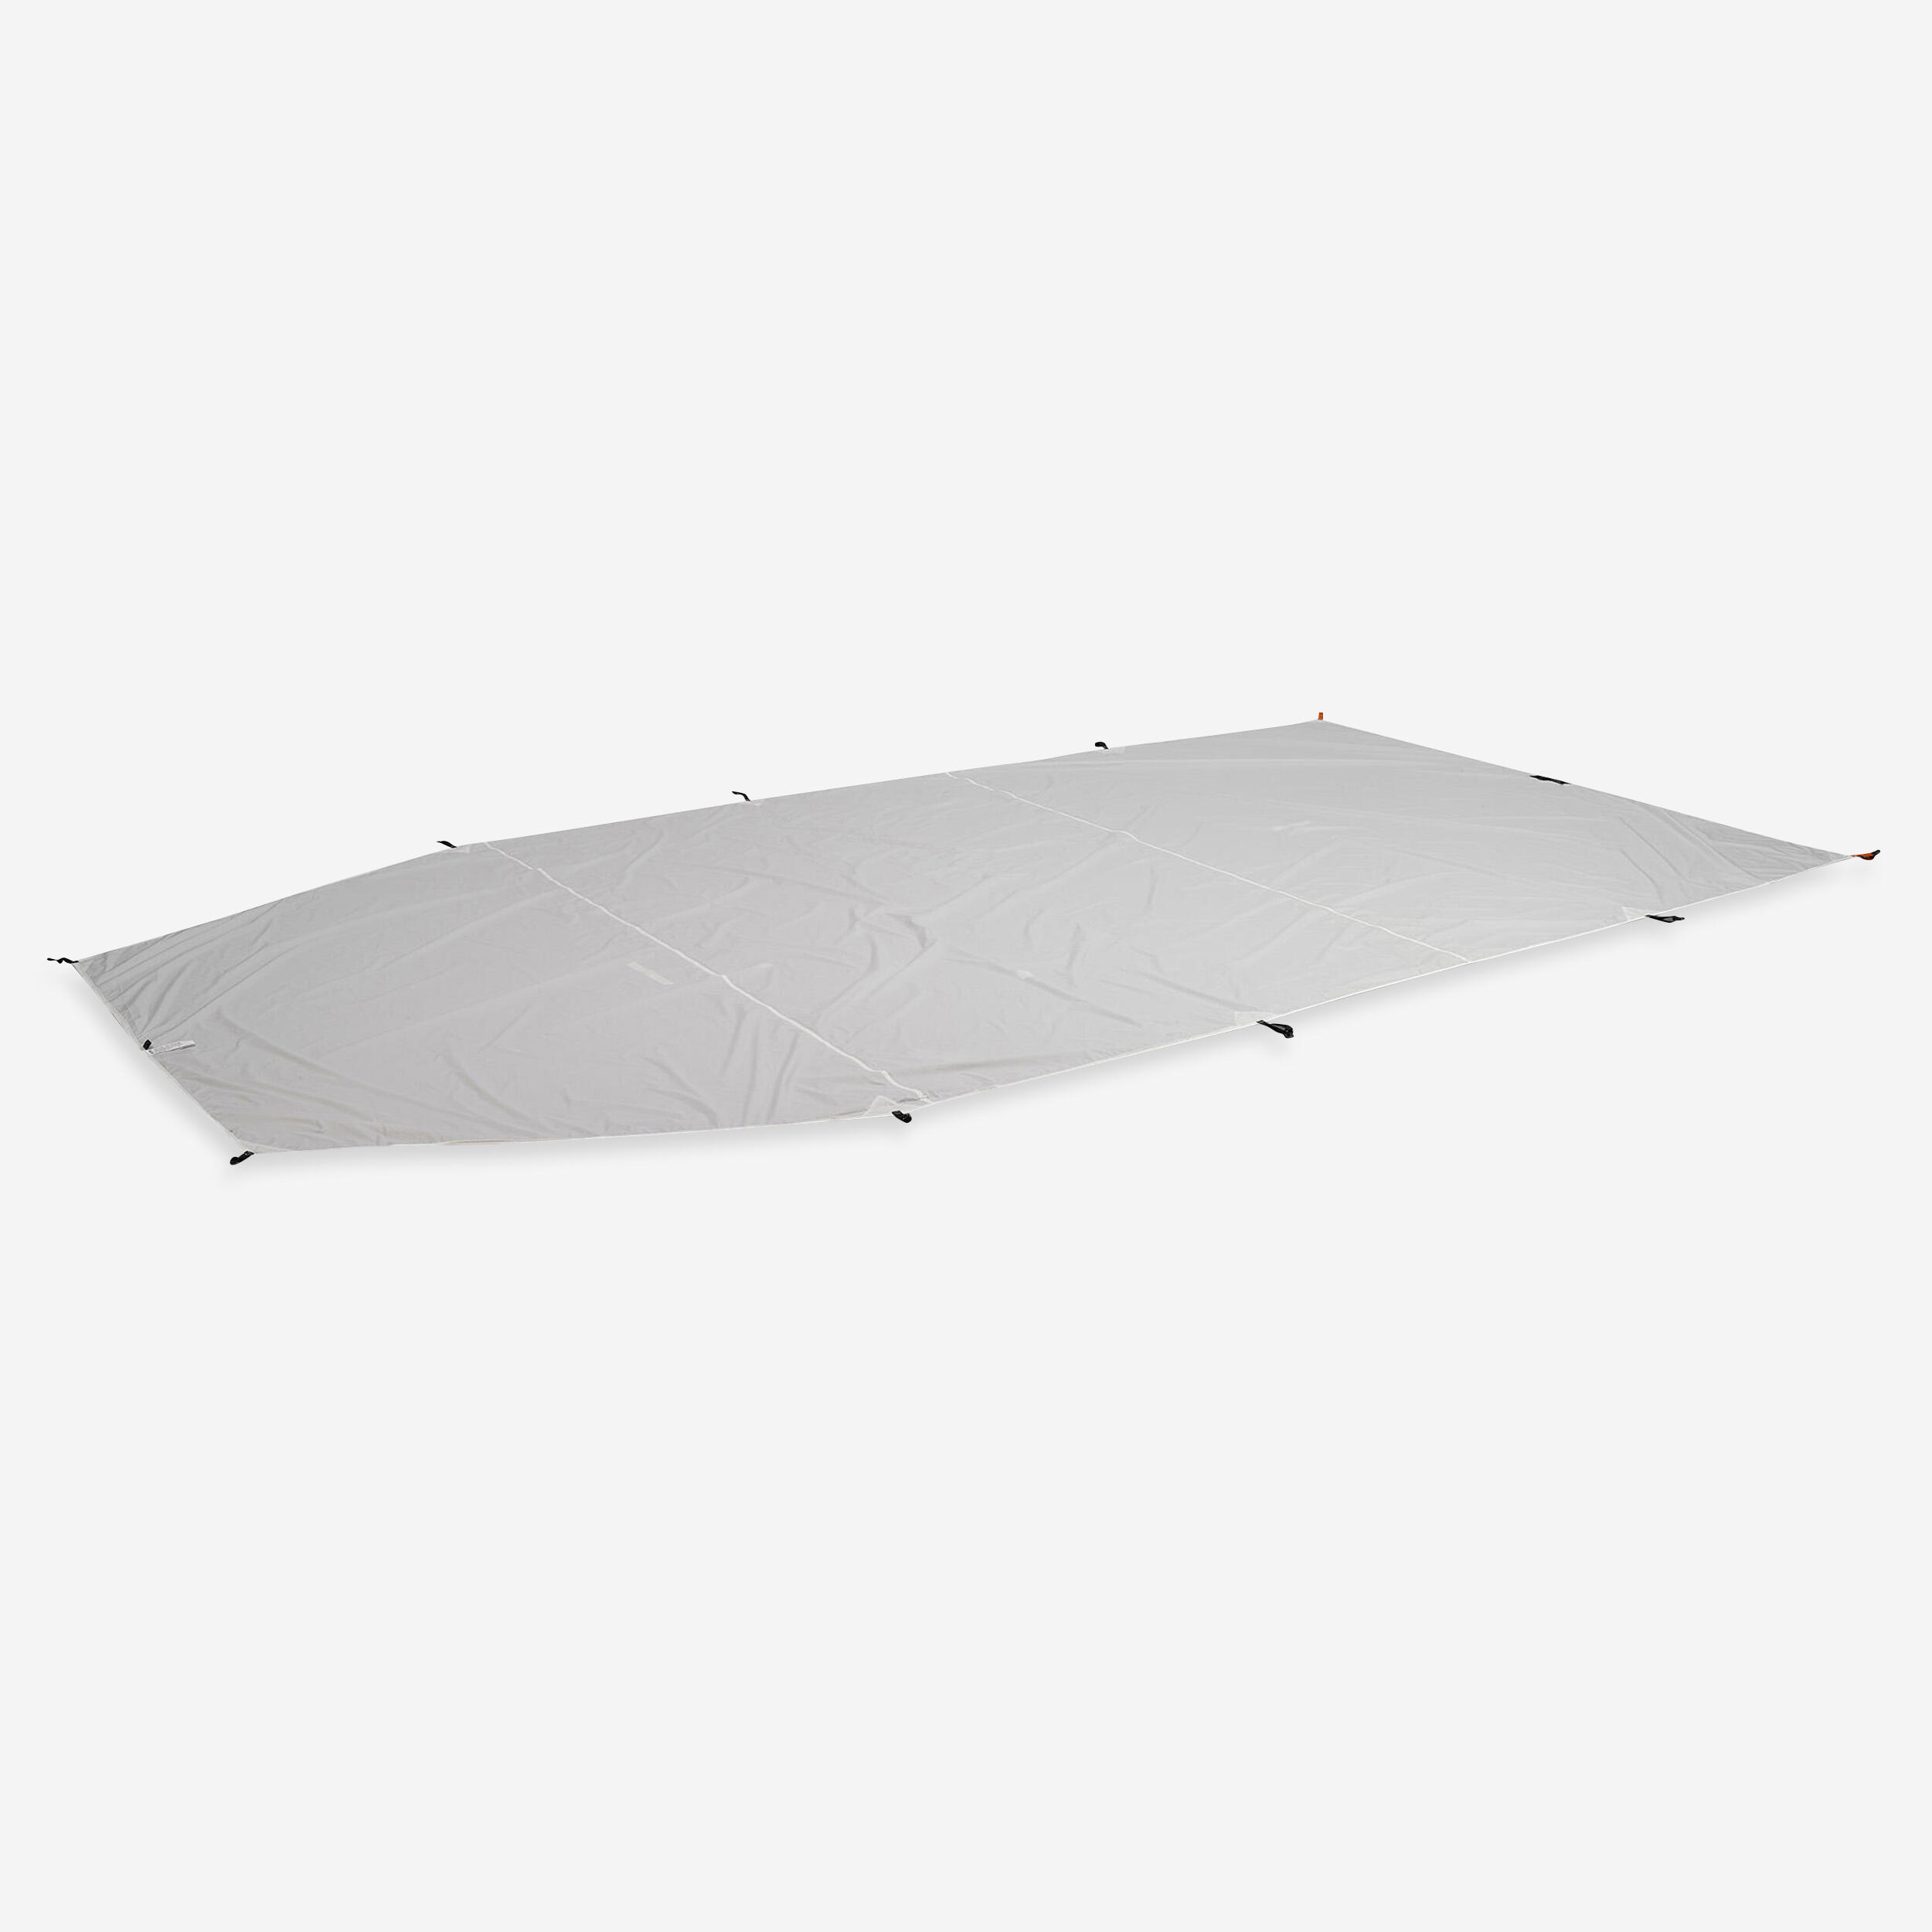 FORCLAZ Groundsheet MT900 for 4 person tent - Undyed